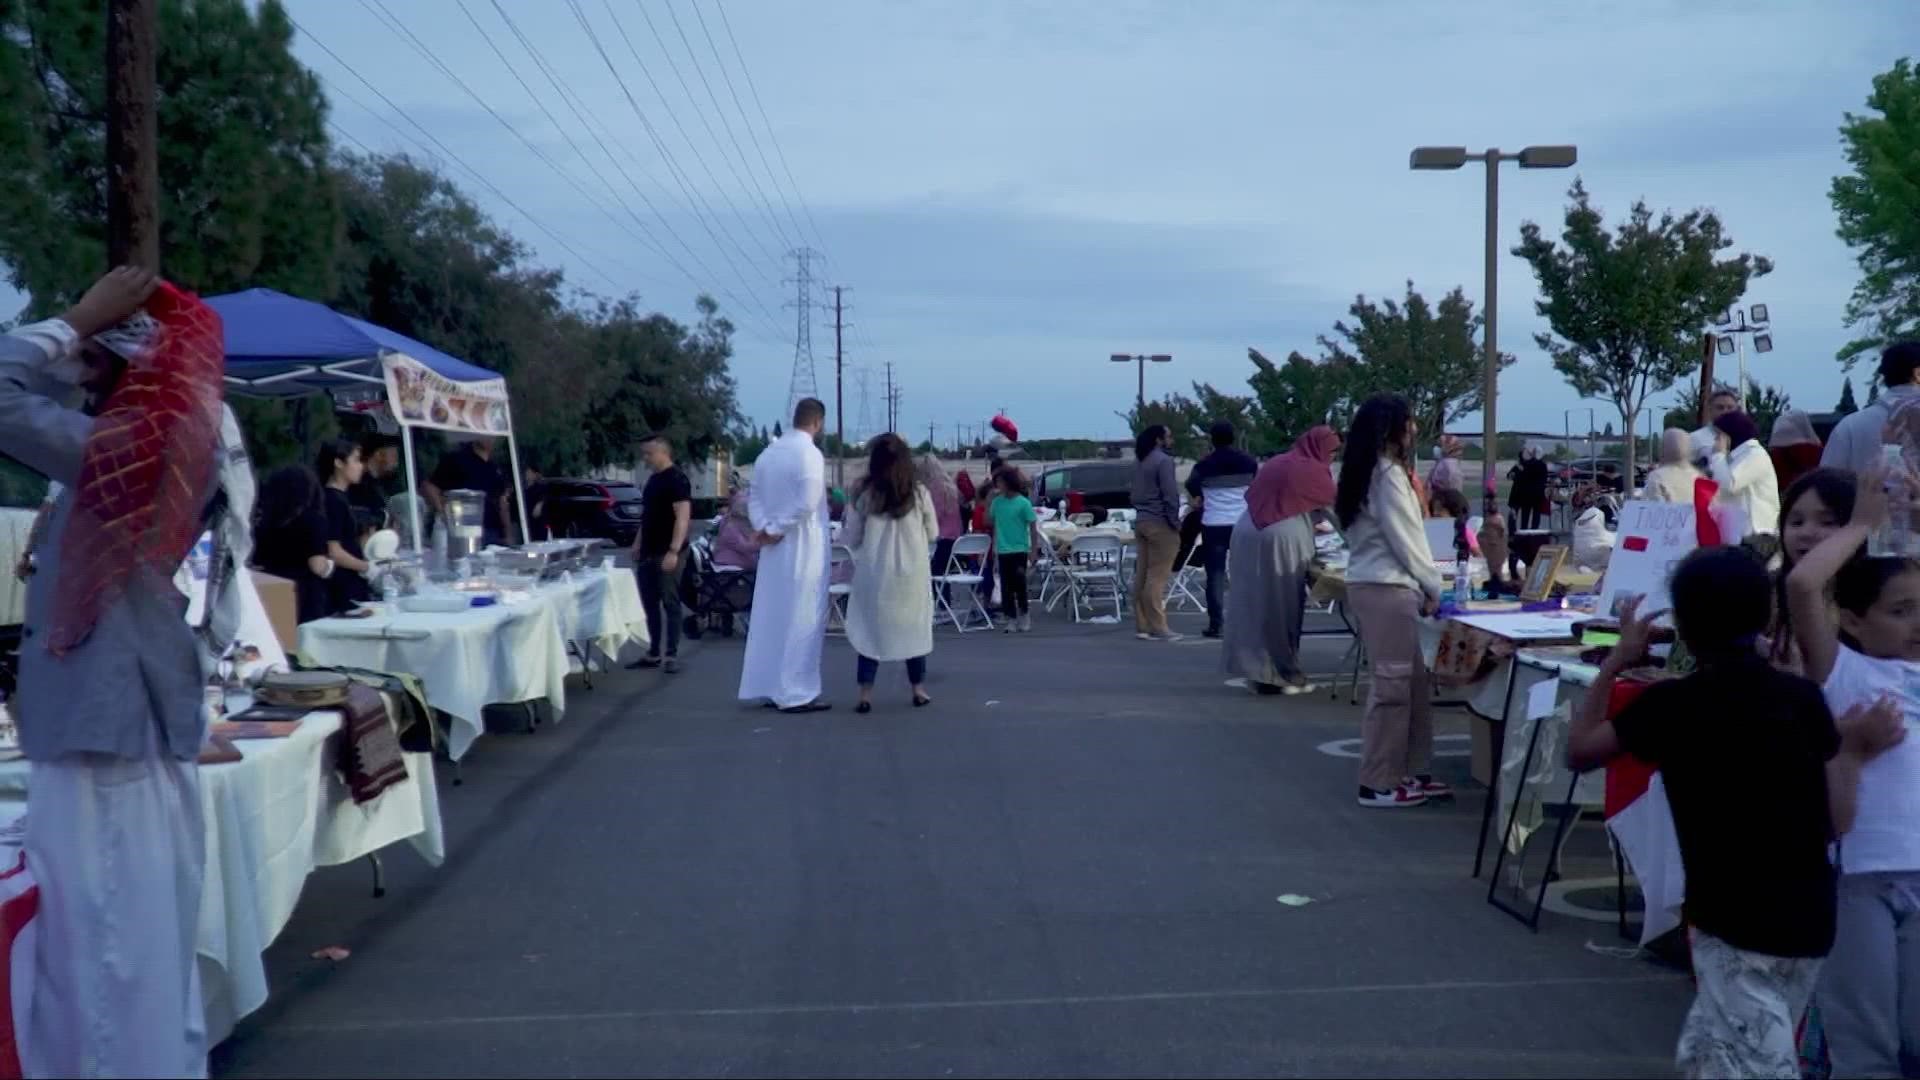 Tarbiya House in Natomas hosted its first culture festival Friday night to bring together different Muslim communities.